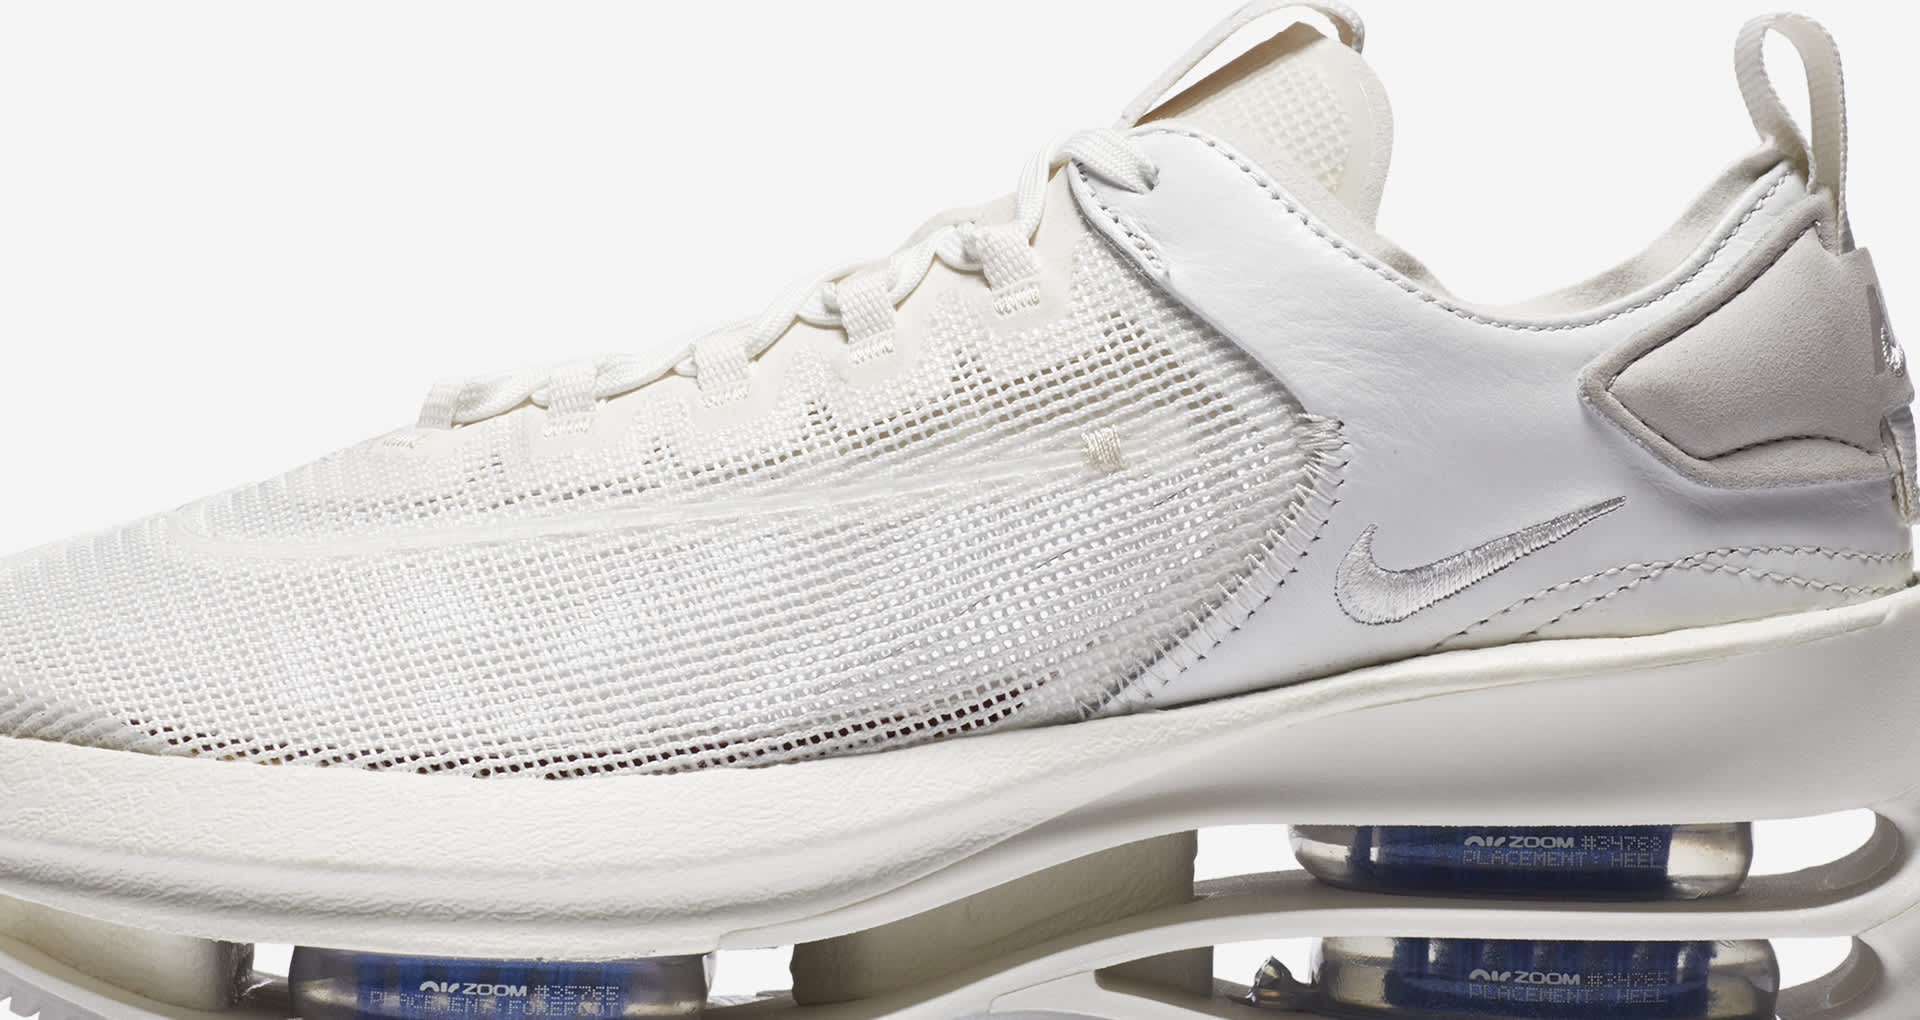 Women's Zoom Double Stacked 'Summit White' Release Date. Nike SNKRS SG